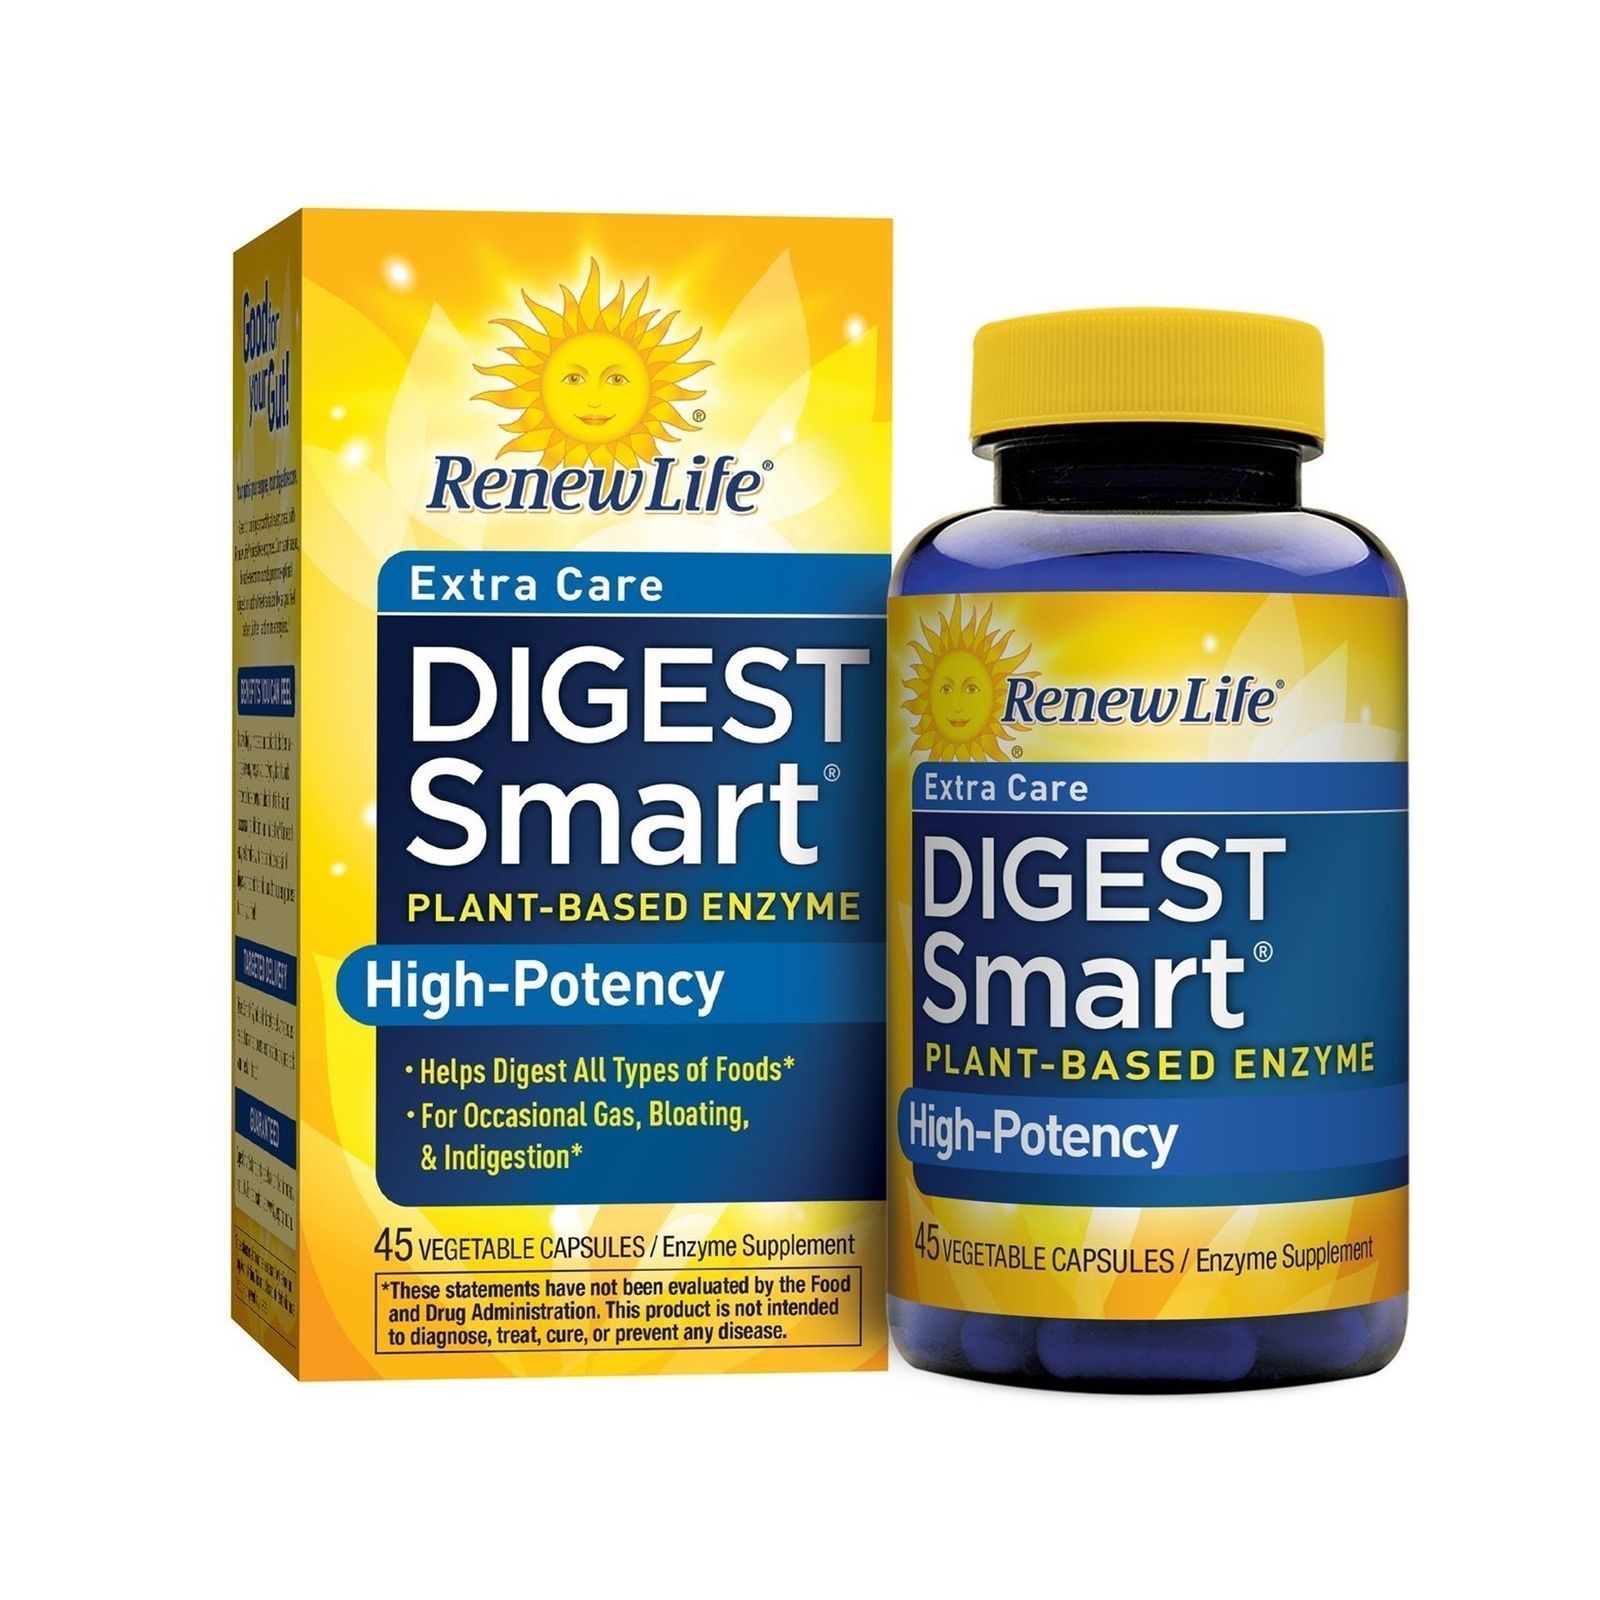 High potency vitamin. Digest. Digestive Enzymes. Ферменты дайджест. Caress and Digest.